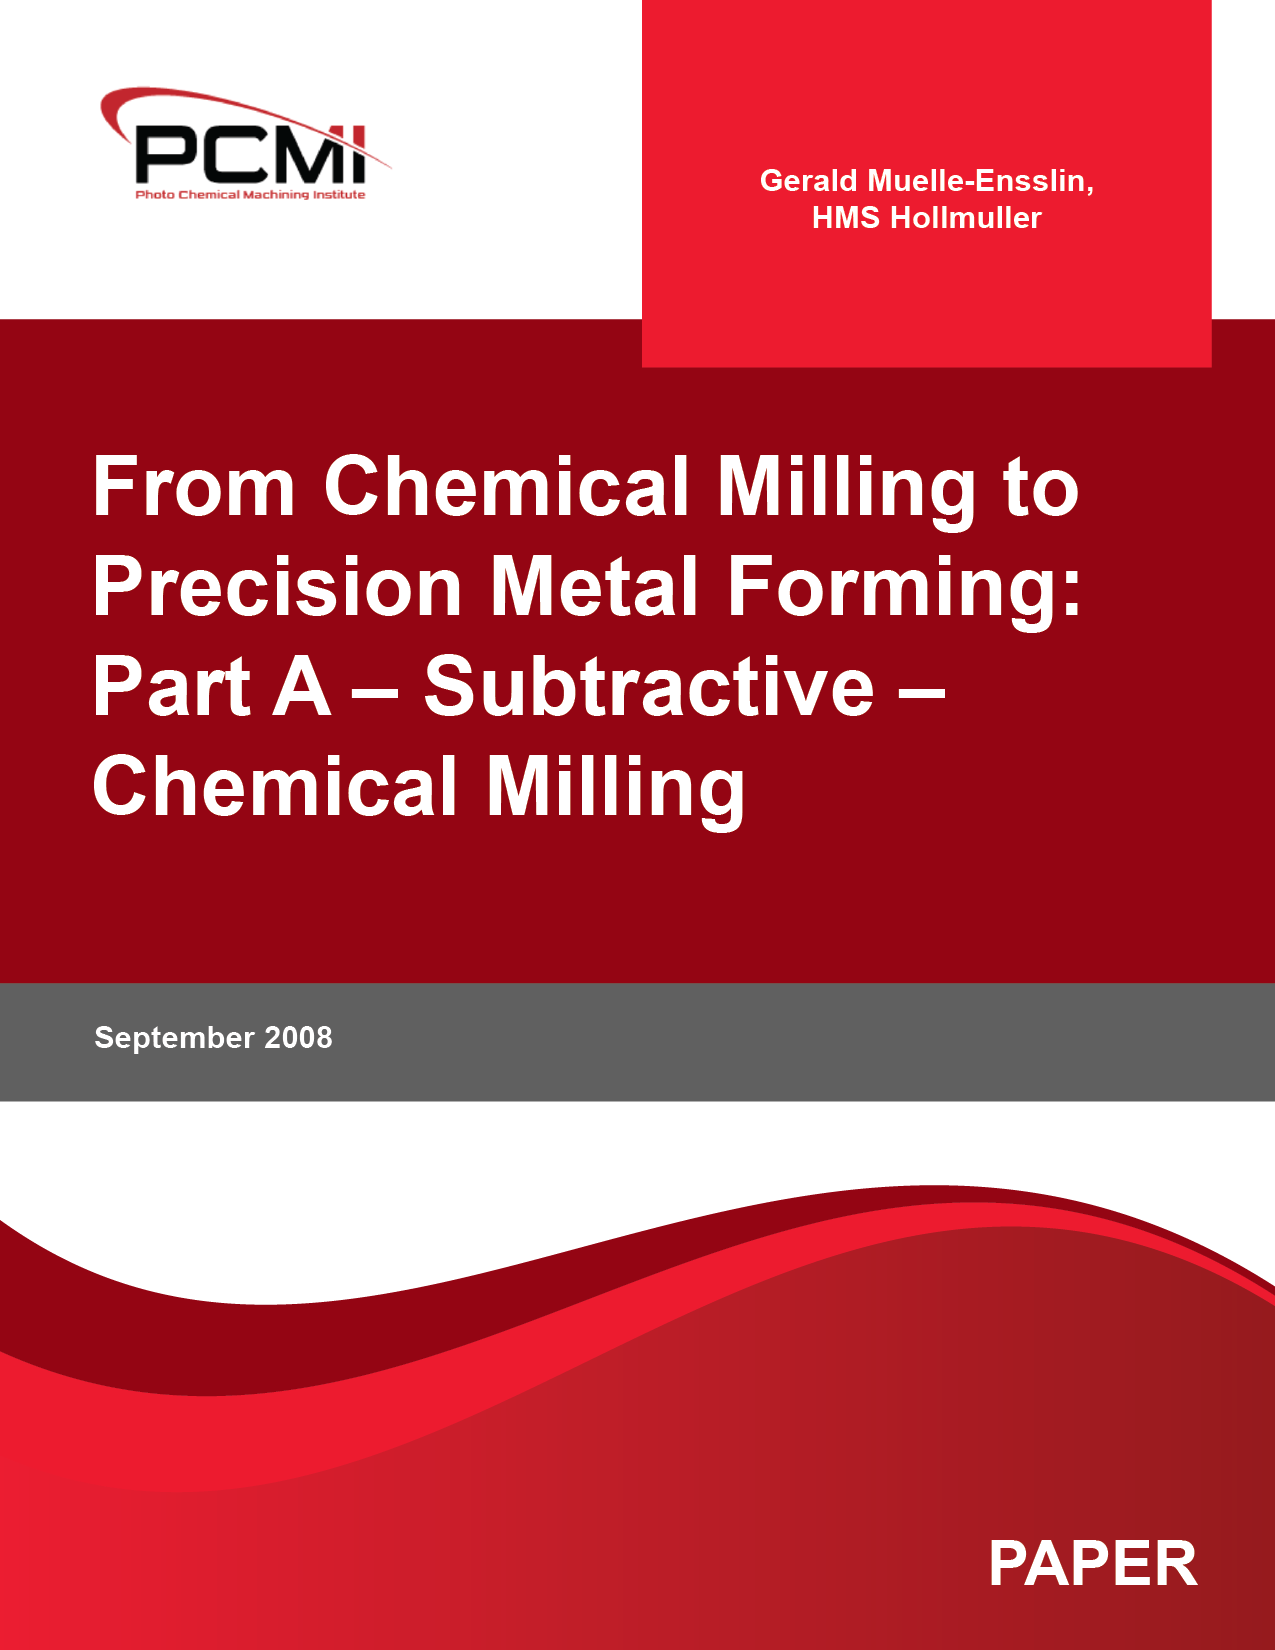 From Chemical Milling to Precision Metal Forming: Part A – Subtractive – Chemical Milling